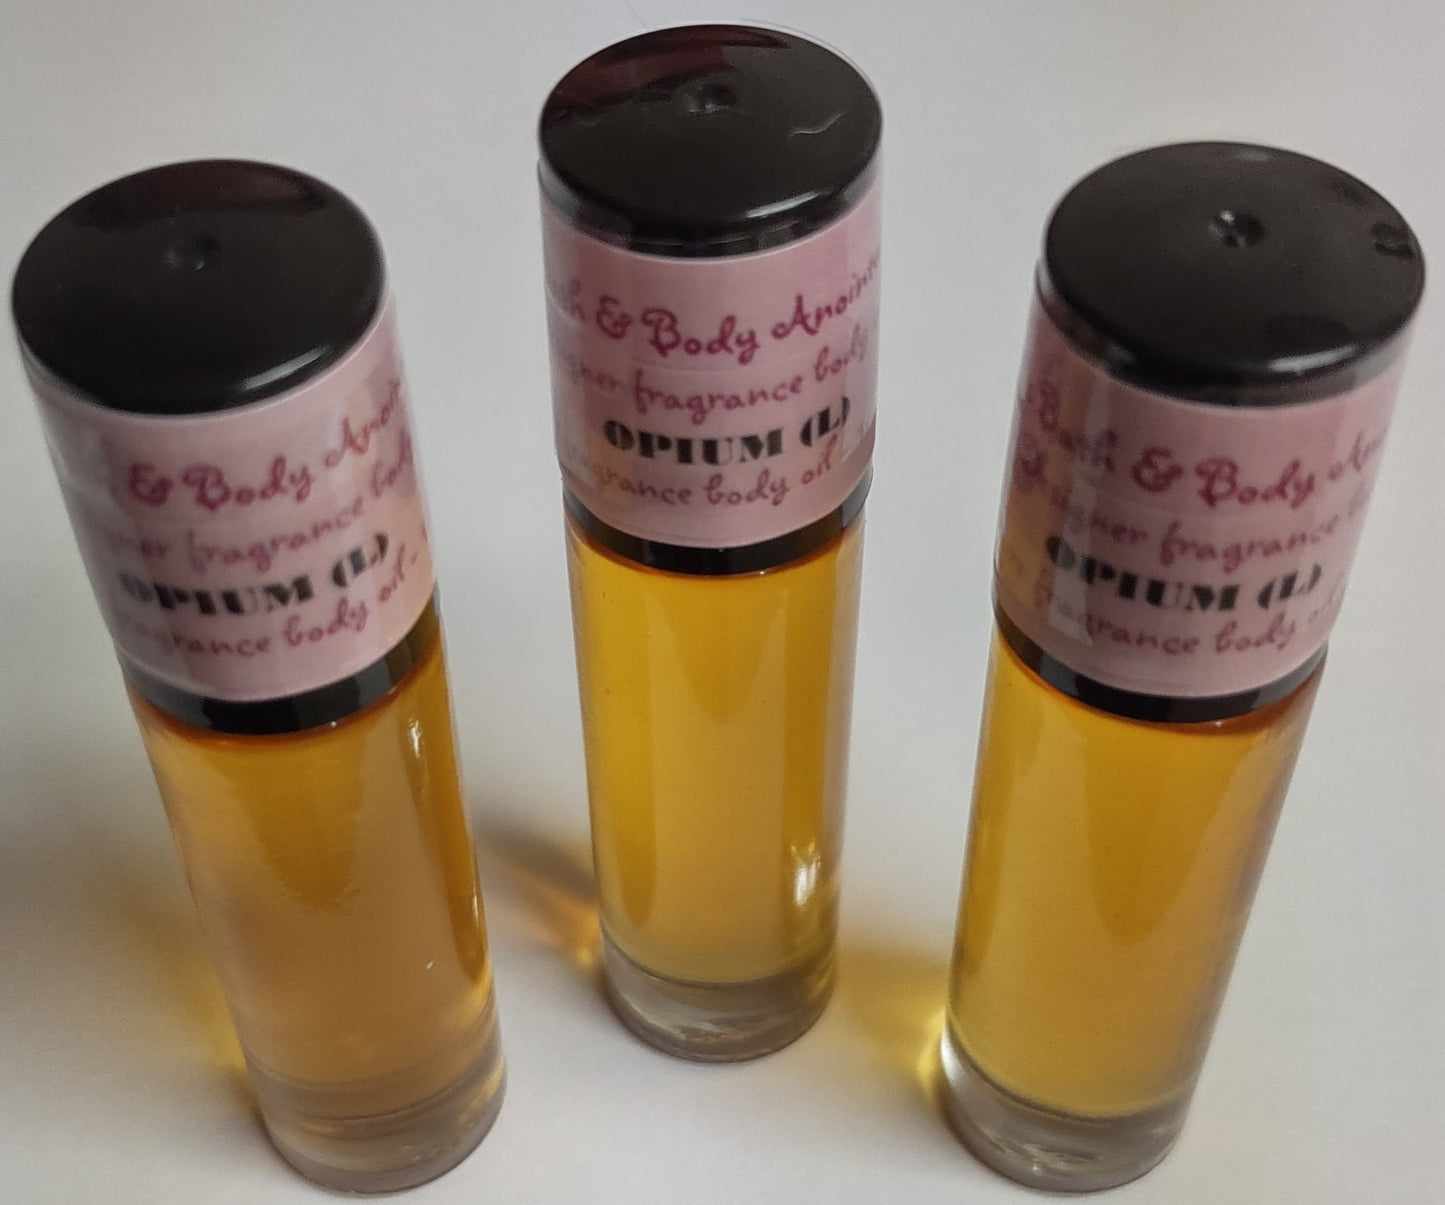 Our impression of - Opium roll-on fragrance body oil for women